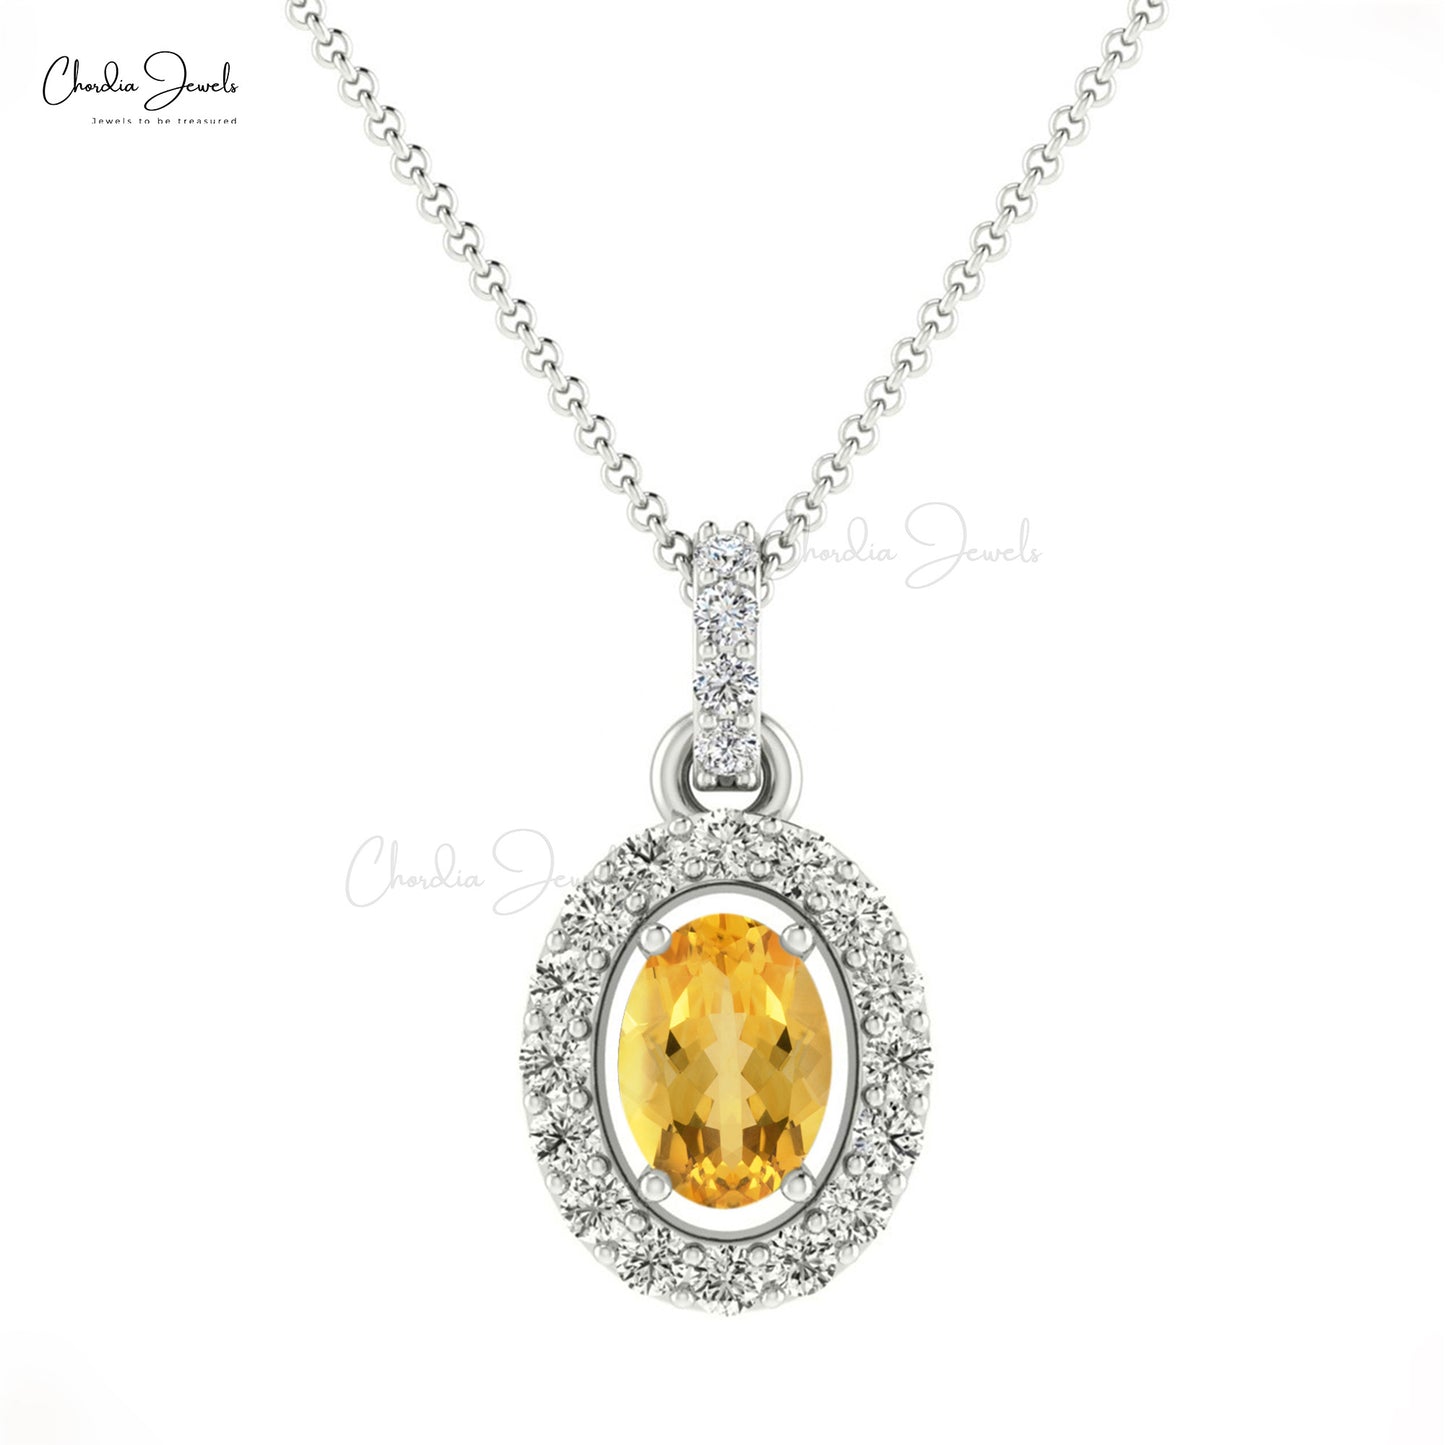 Natural Citrine Halo Pendant, 14k Solid Gold Diamond Pendant, 7x5mm Oval Faceted November Birthstone Pendant Gift for Wife